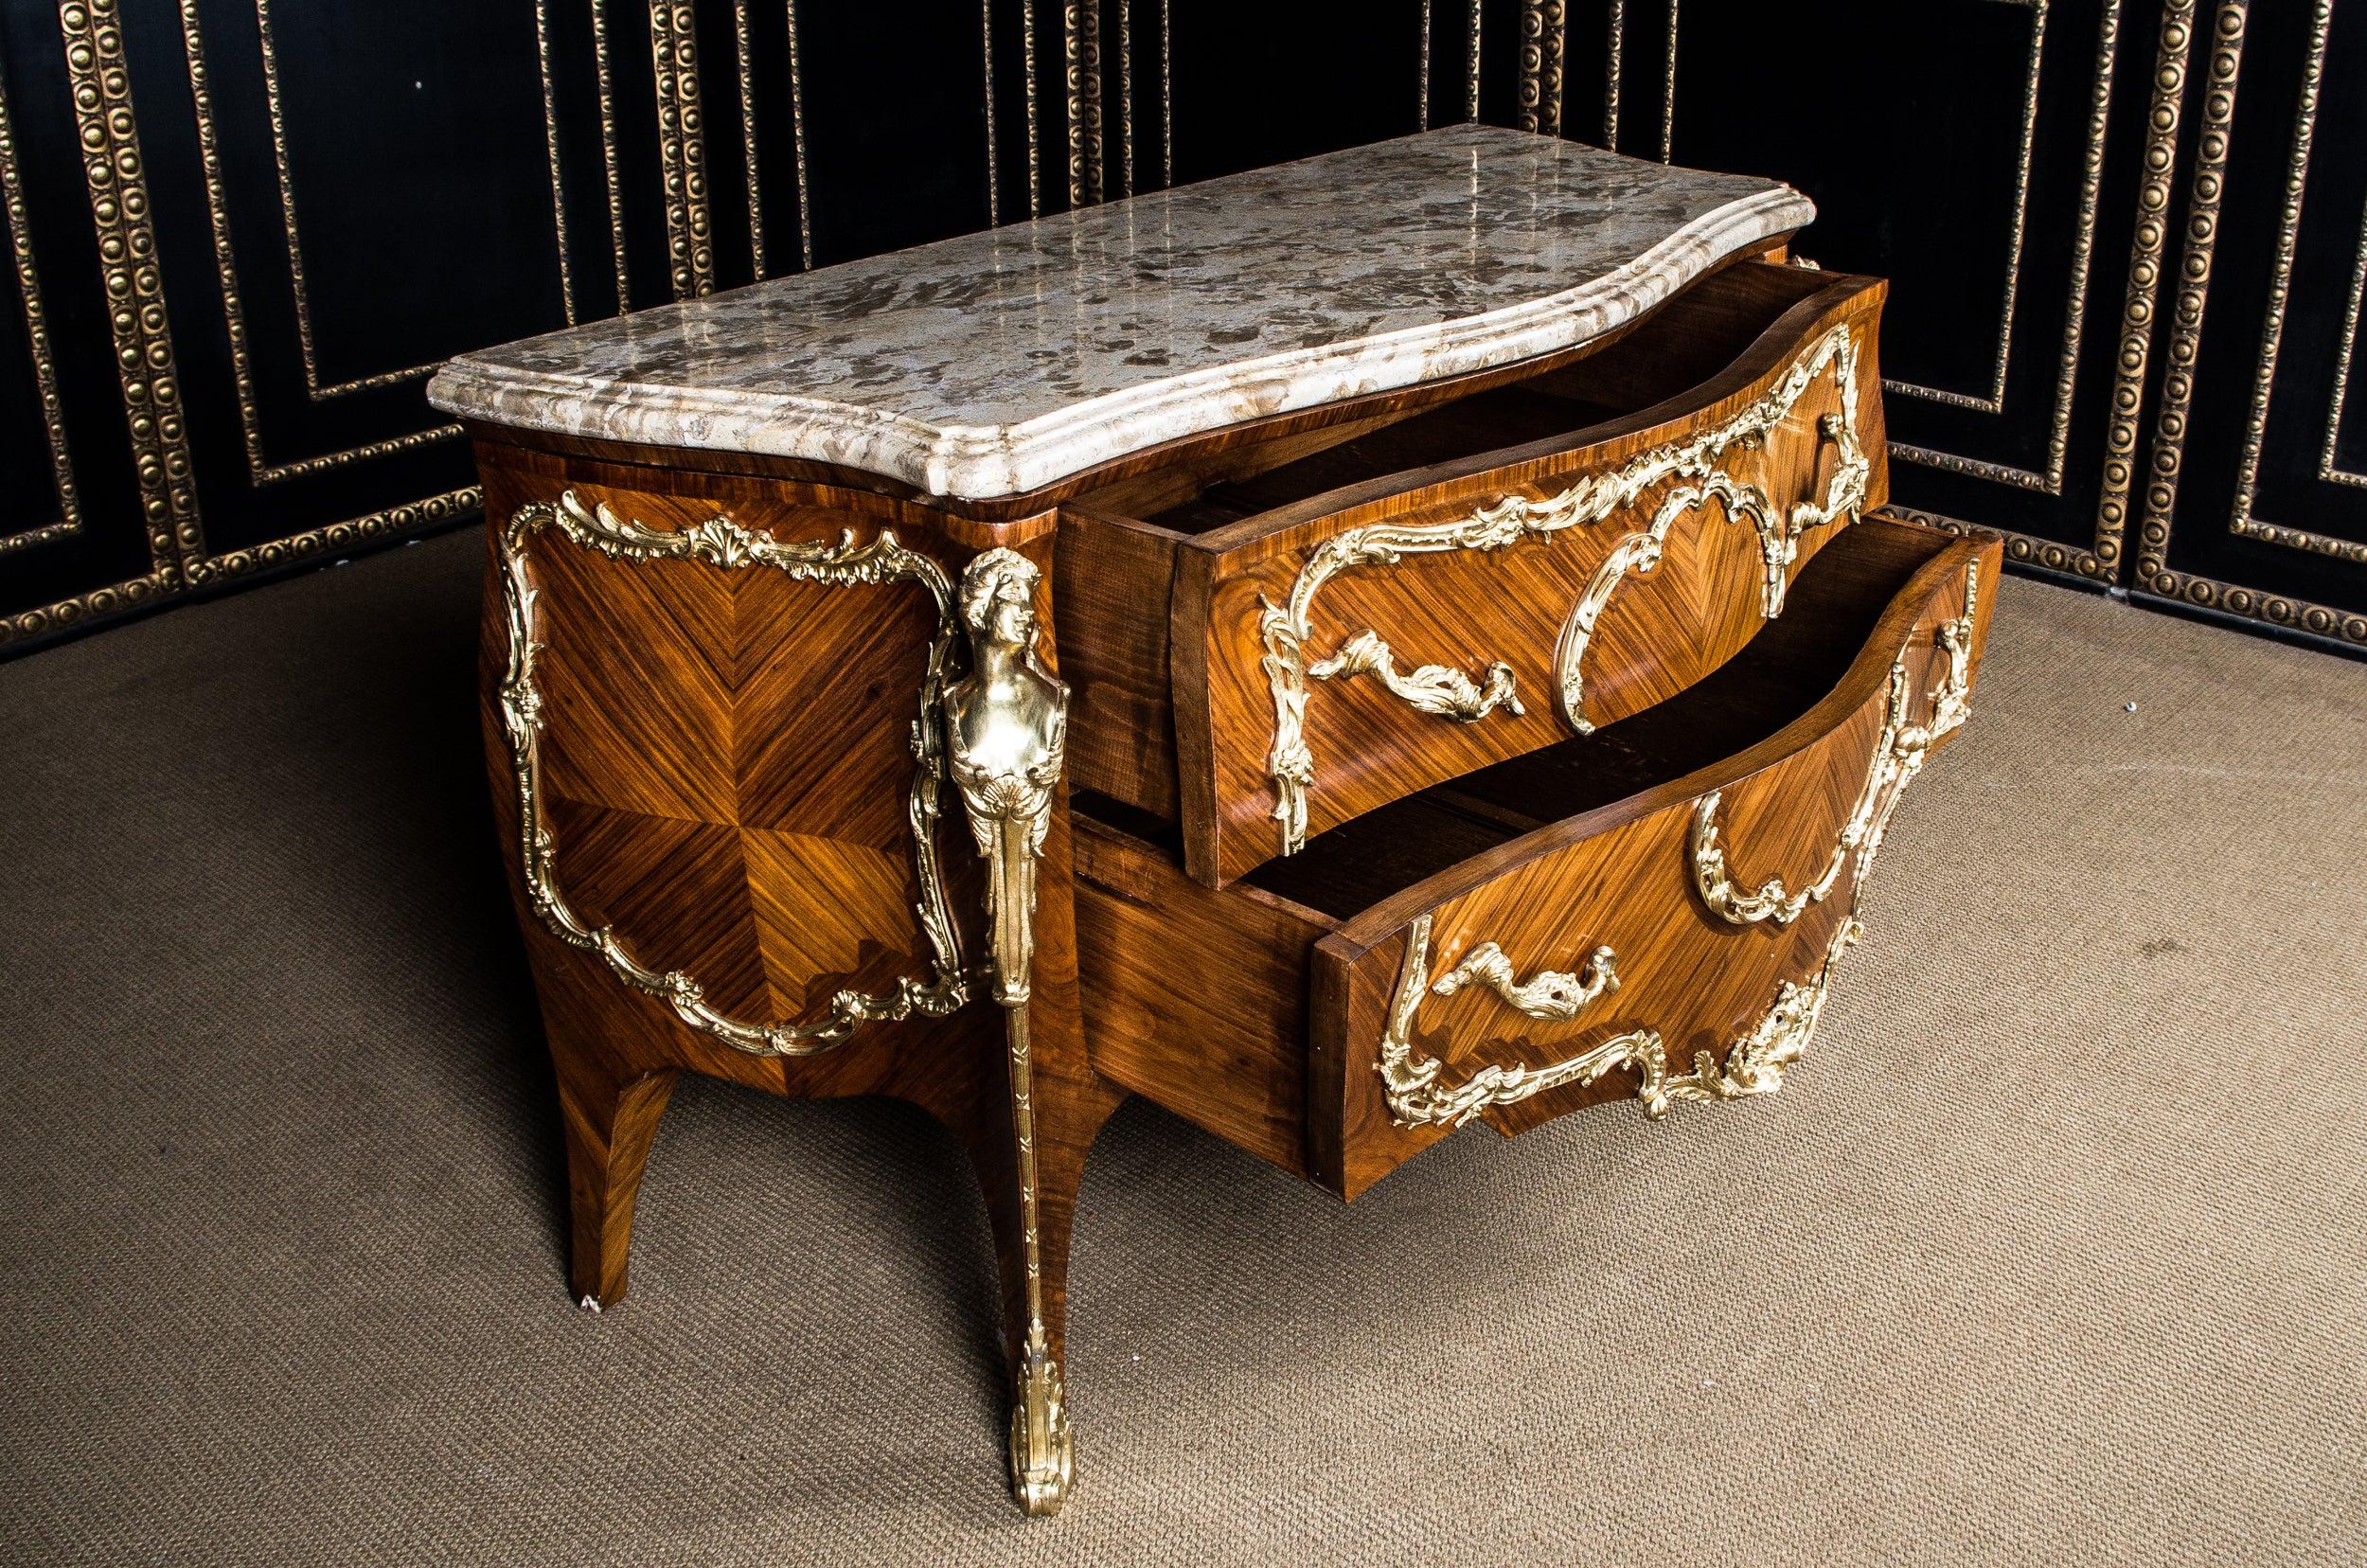 High Quality French Chest of Drawers in the Louis Quinze Style Marble Top 9